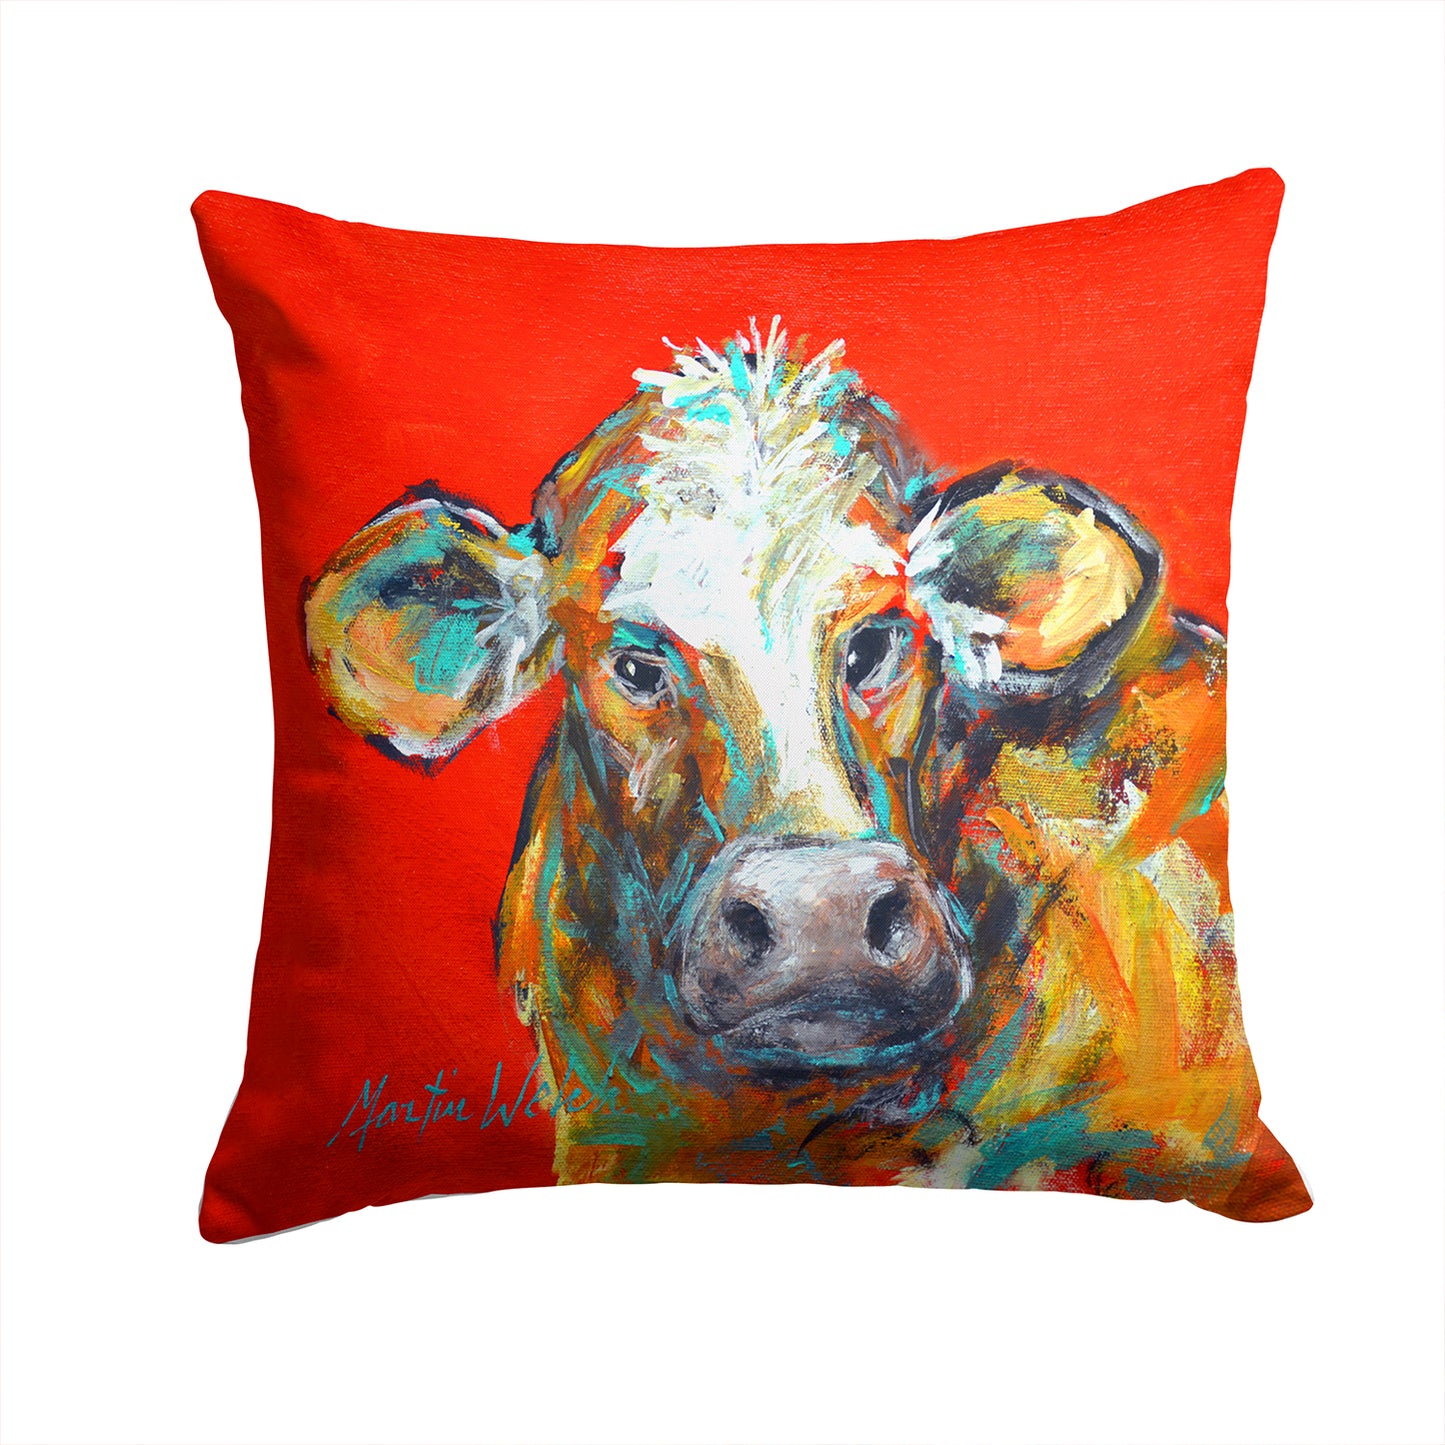 Buy this Cow Caught Red Handed Too Fabric Decorative Pillow